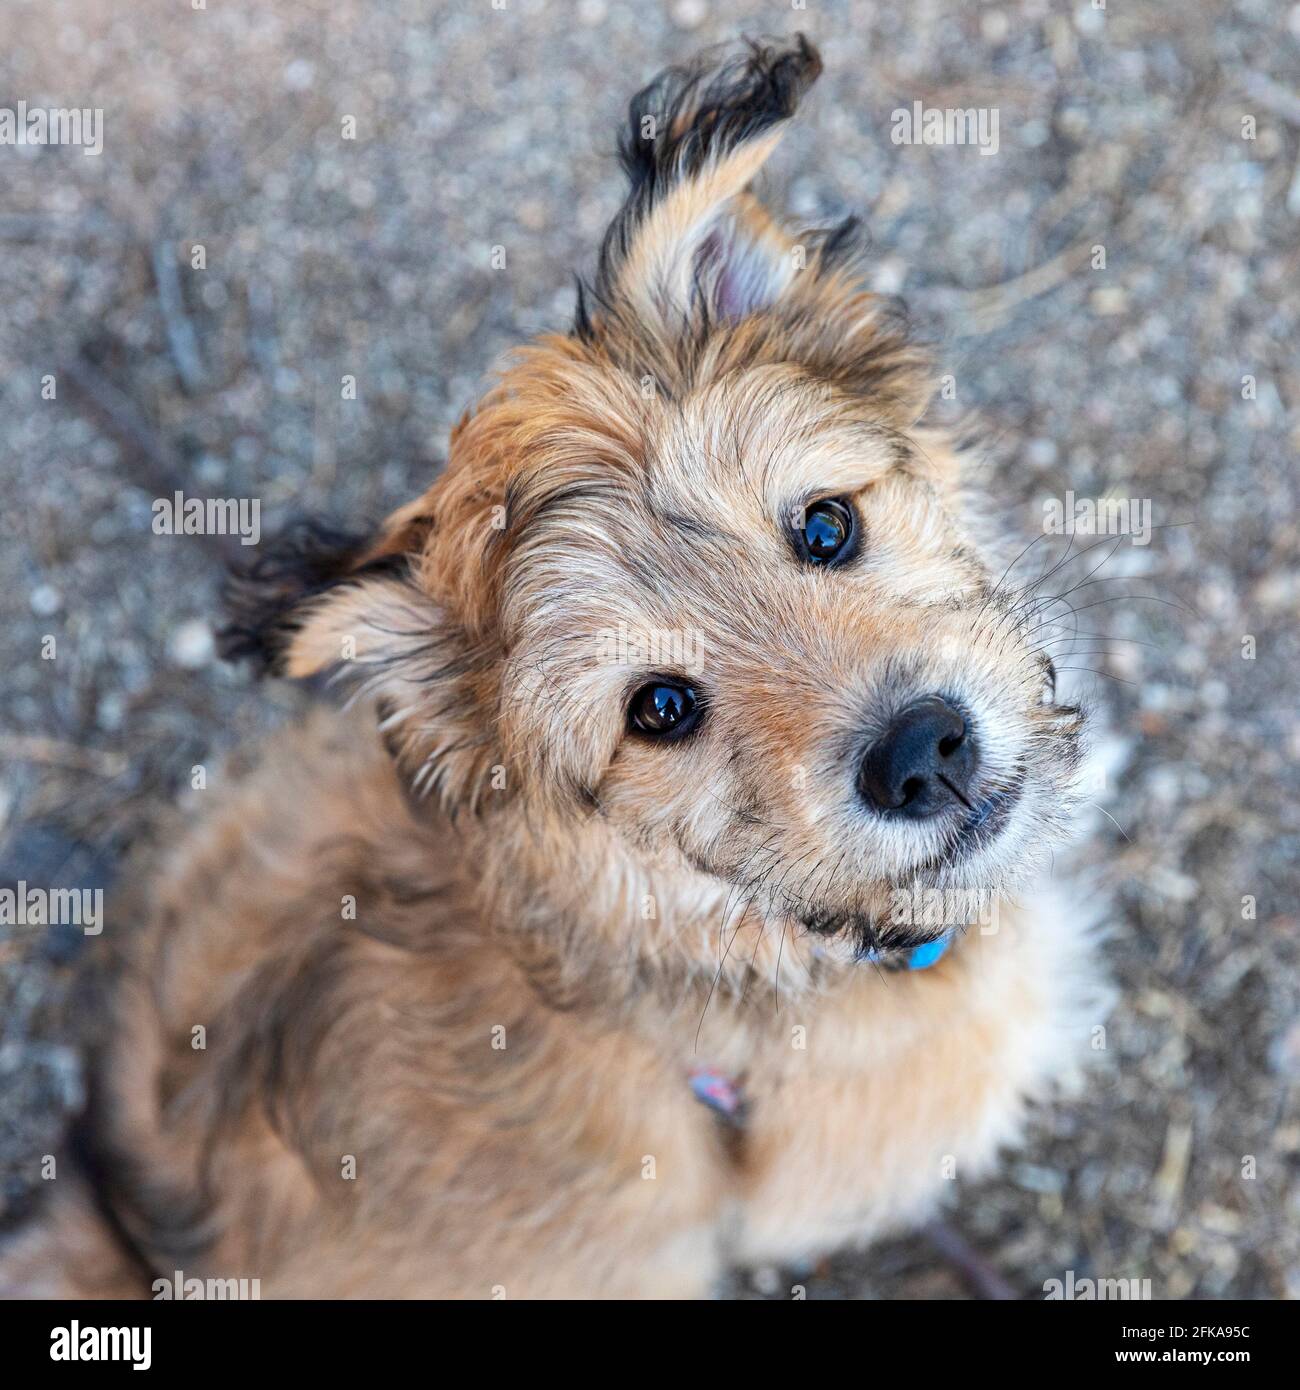 Cute mixed breed poodle puppy looking up at owner. Stock Photo